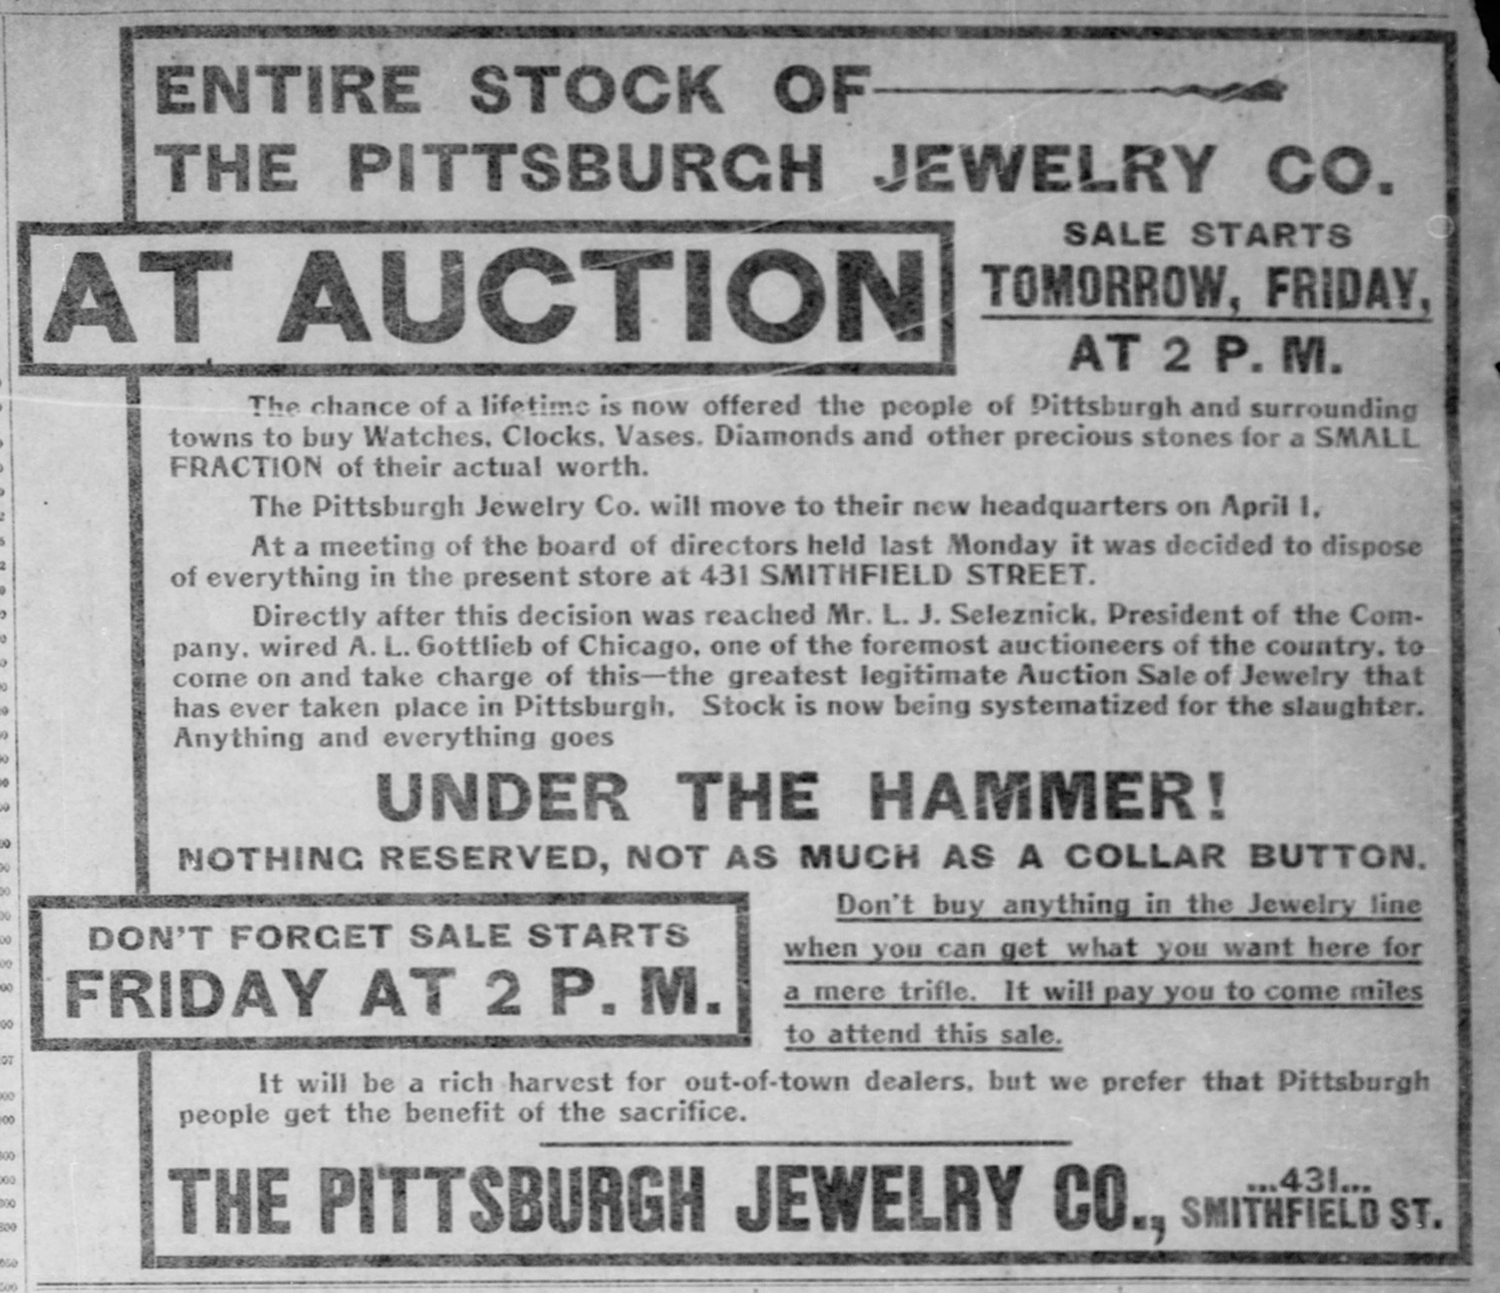 Auction advertisement for Lewis Seleznick’s Pittsburgh Jewelry Company, 1901. The auction was probably related to the store’s relocation from 431 Smithfield Street to larger accommodations at 443 Smithfield Street later that year. Pittsburgh Post-Gazette, February 28, 1901.